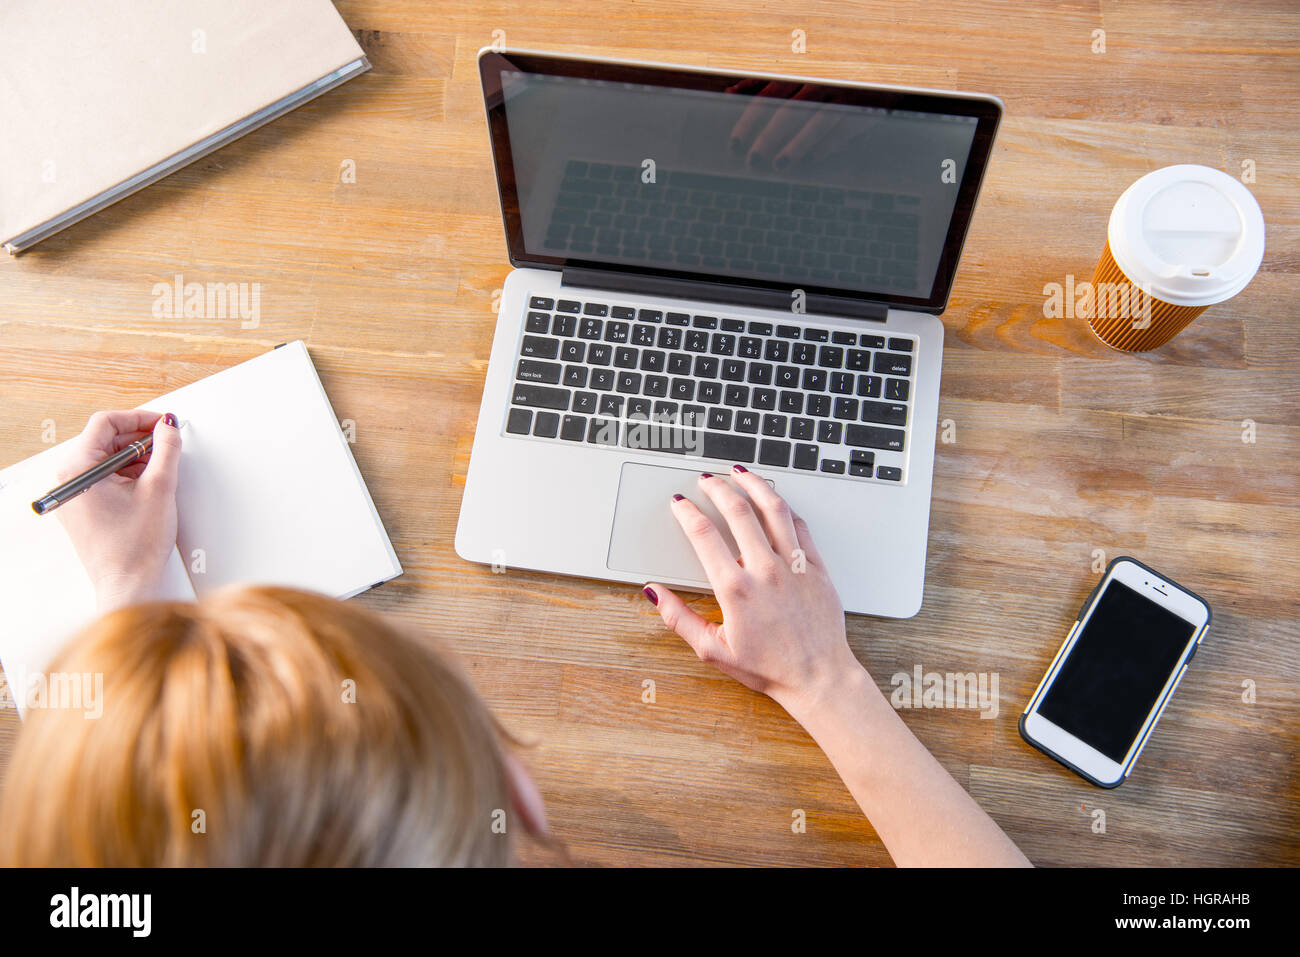 Top view of young woman using laptop and making notes in notebook Stock Photo